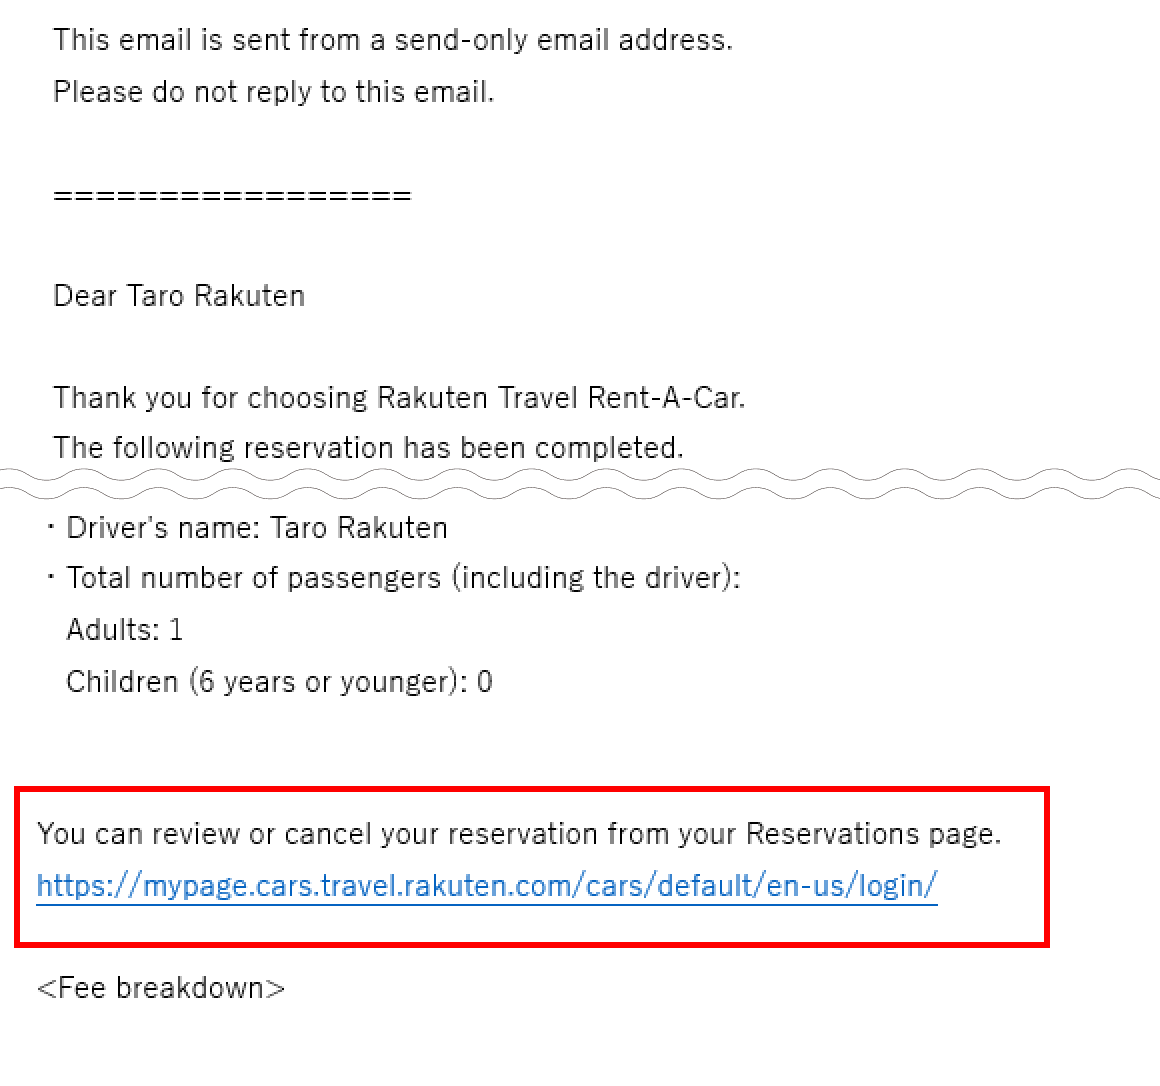 Use the Personal Page link found in your reservation confirmation email